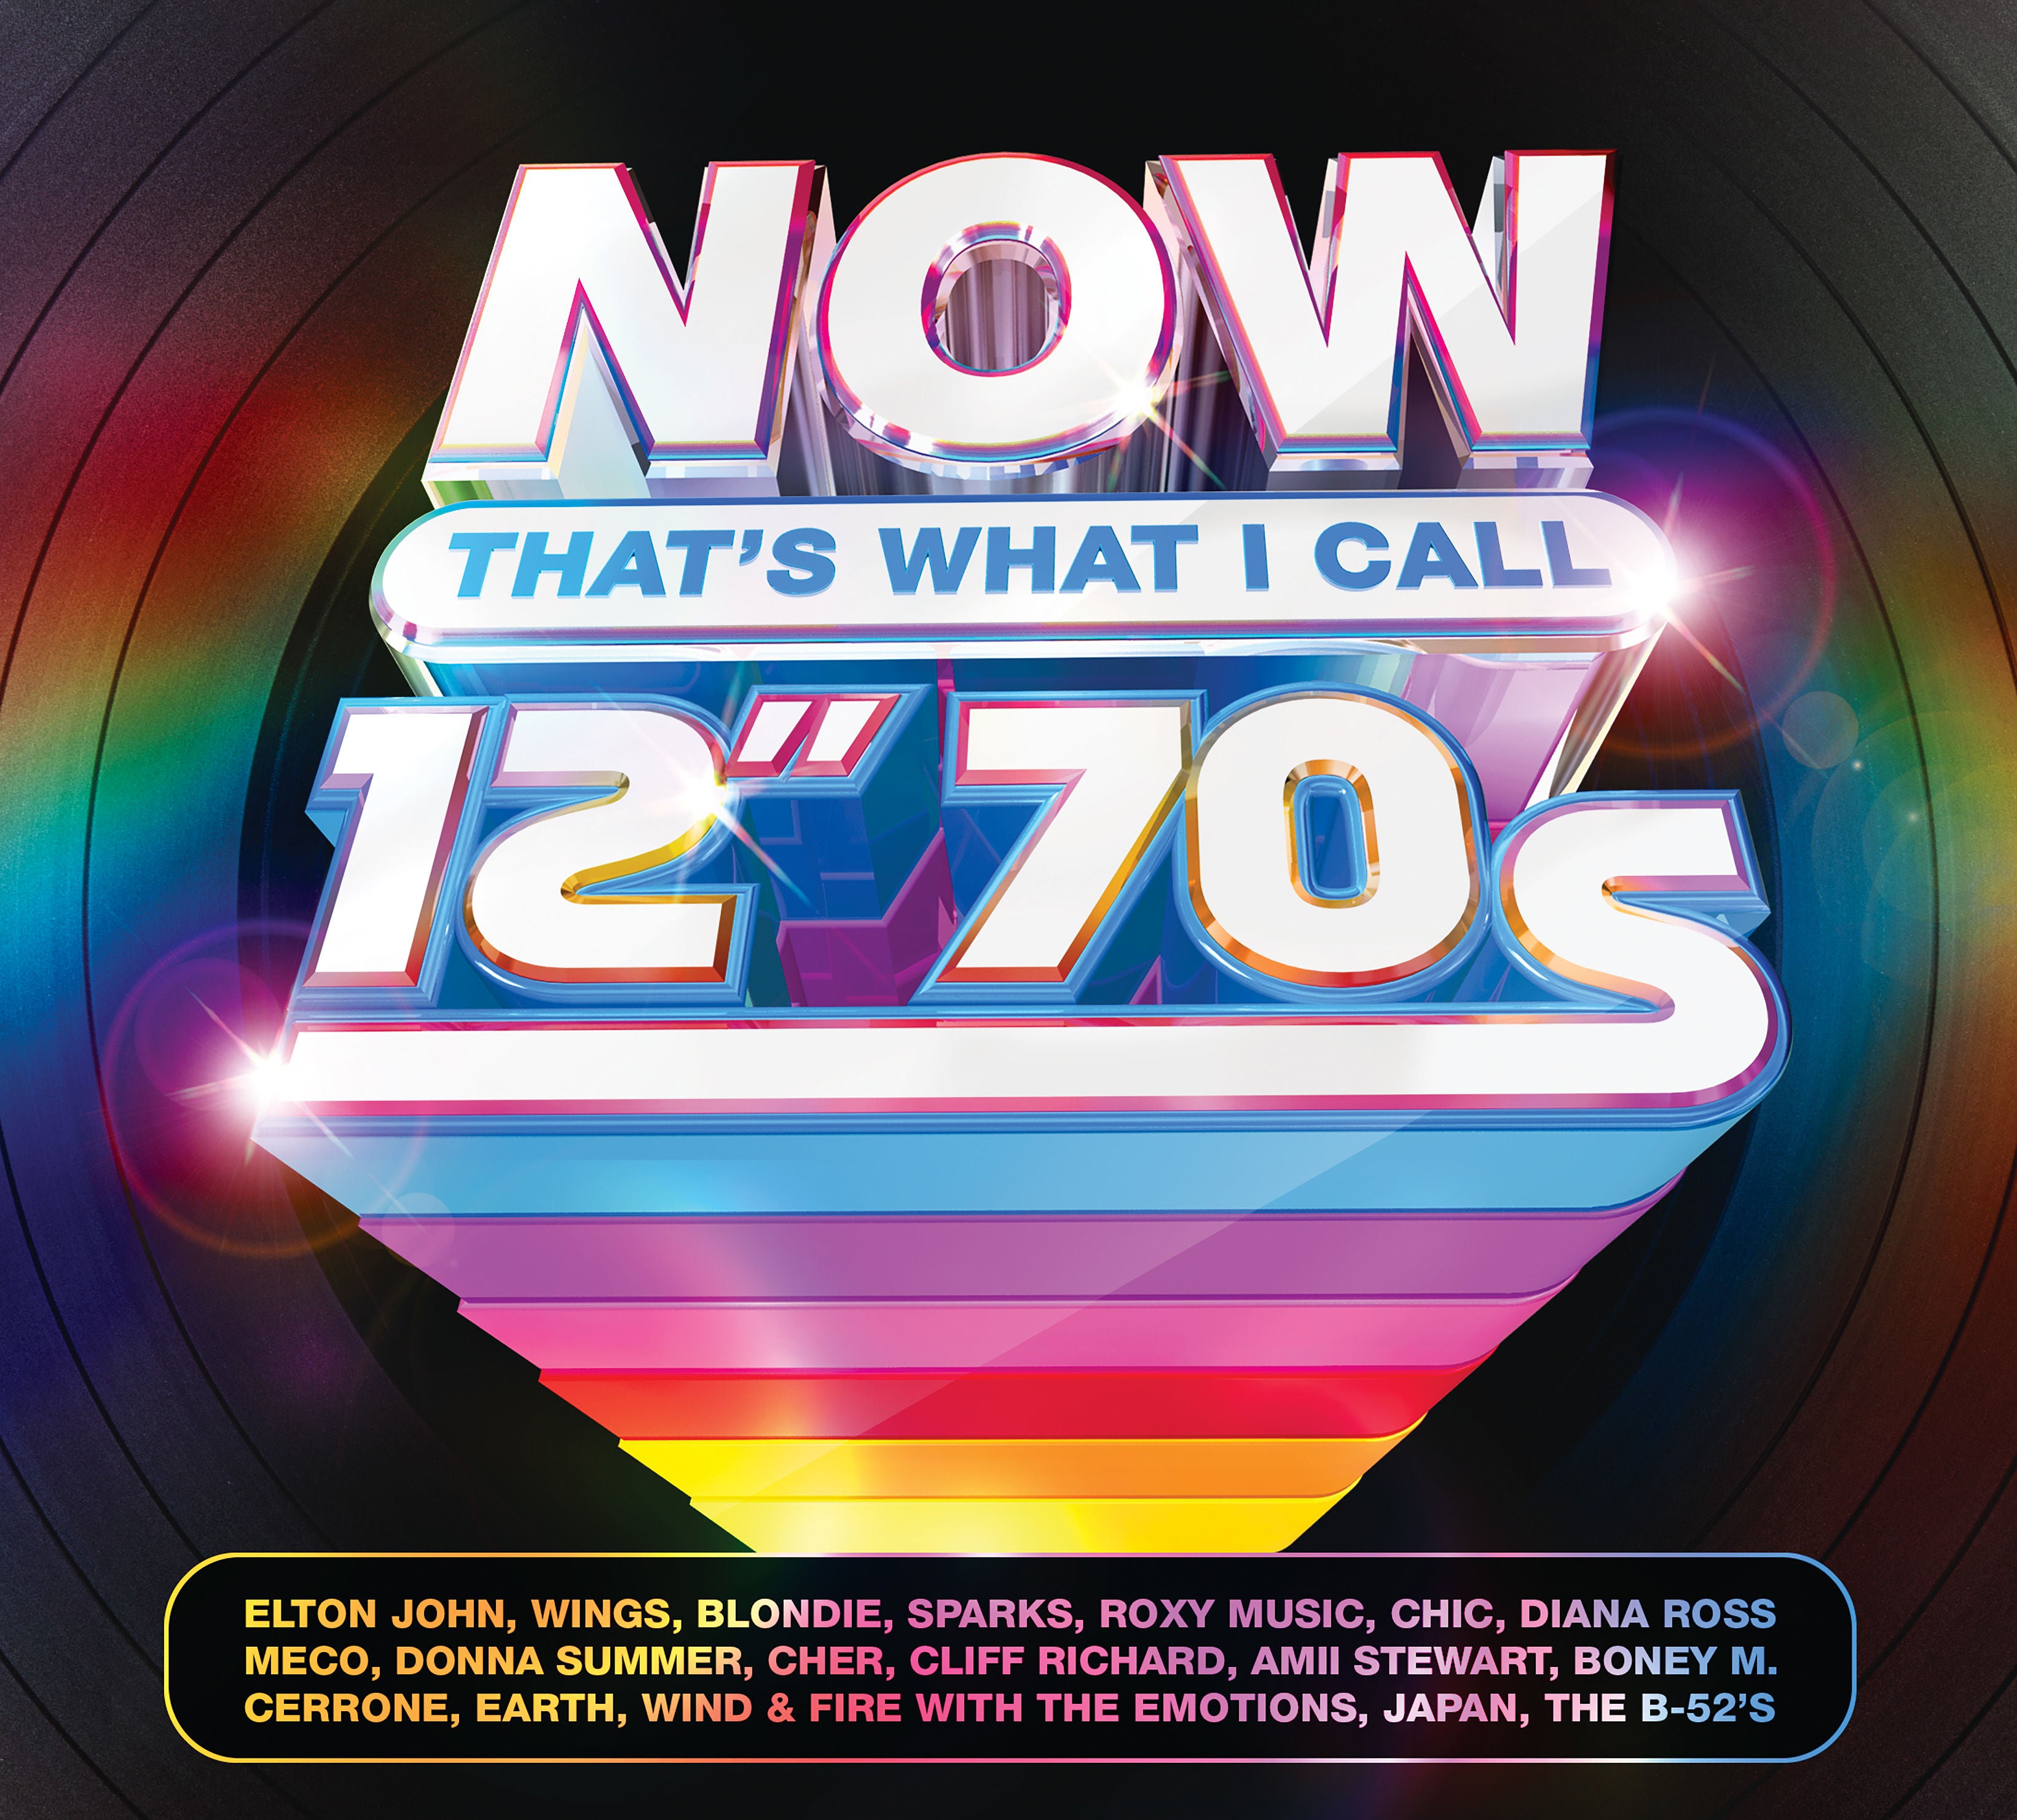 Various Artists - NOW That’s What I Call 12” 70s (4CD)